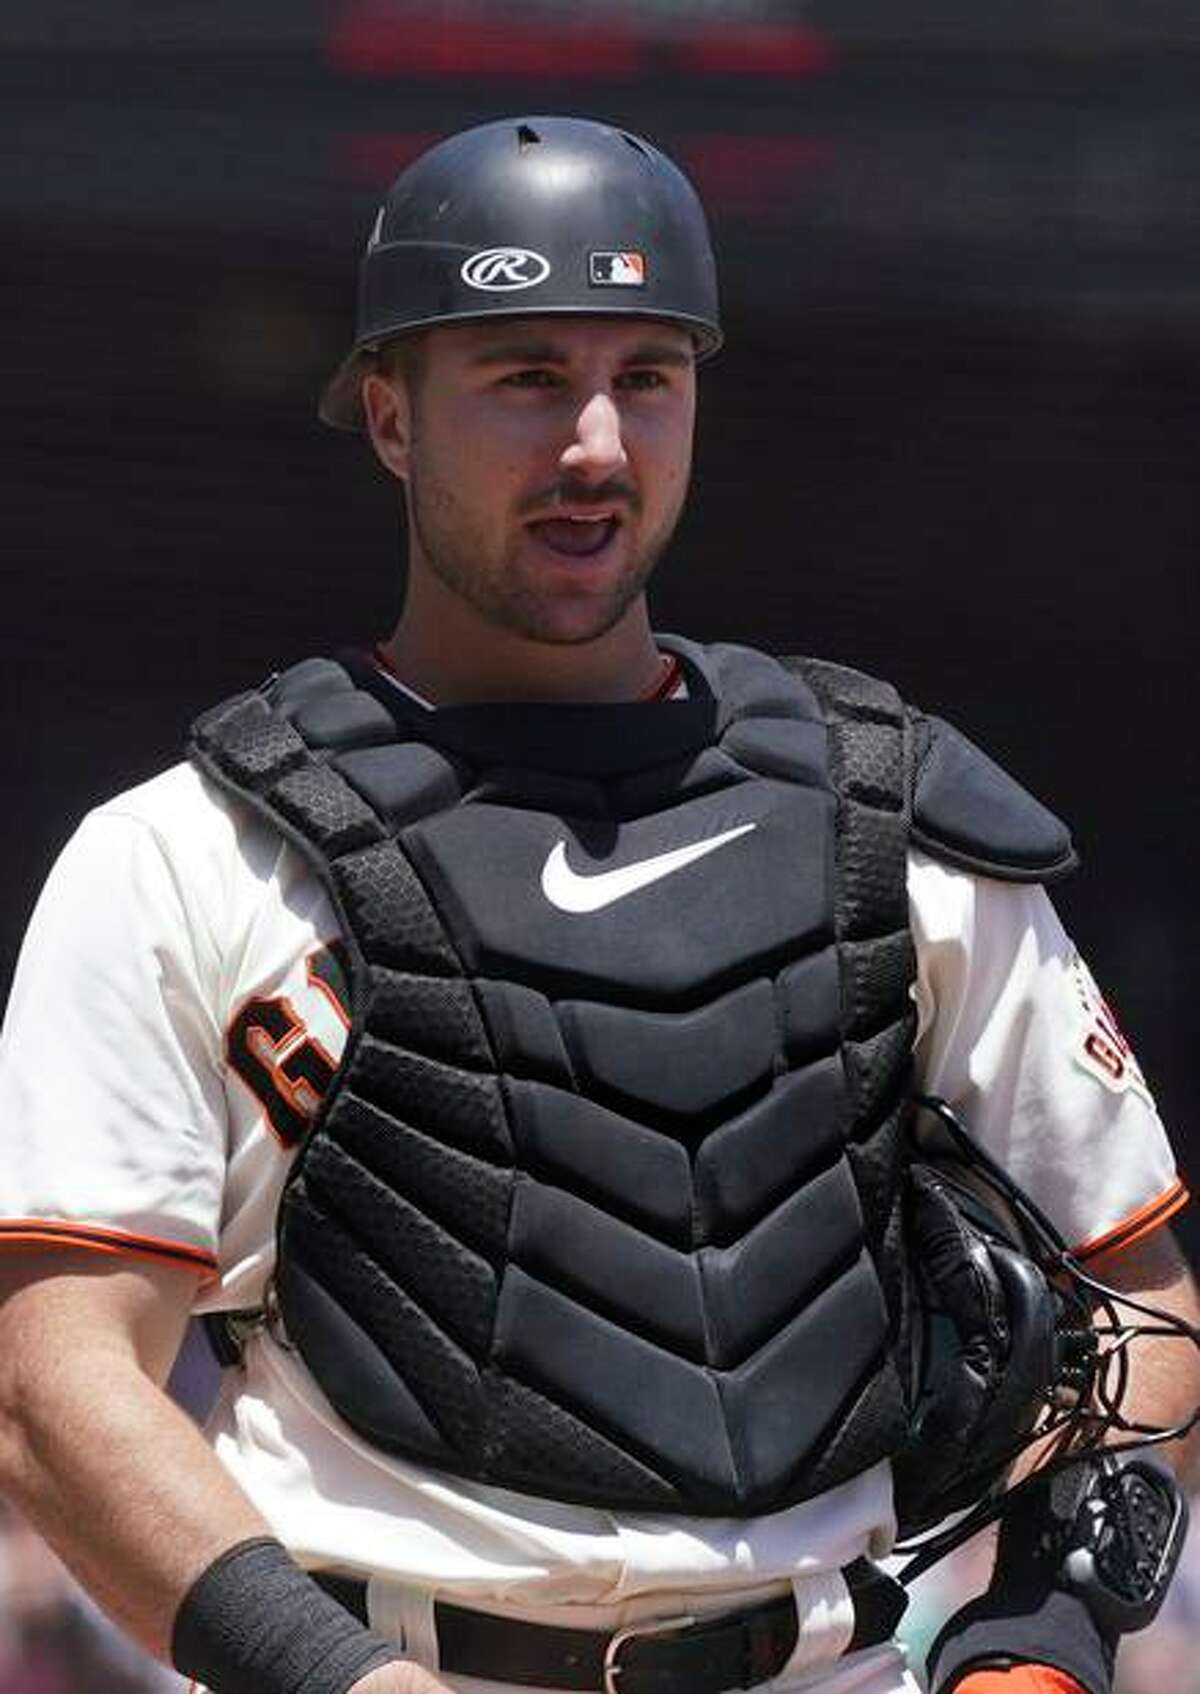 Catcher Joey Bart has struck out 15 times in his last 25 at-bats for the Giants.